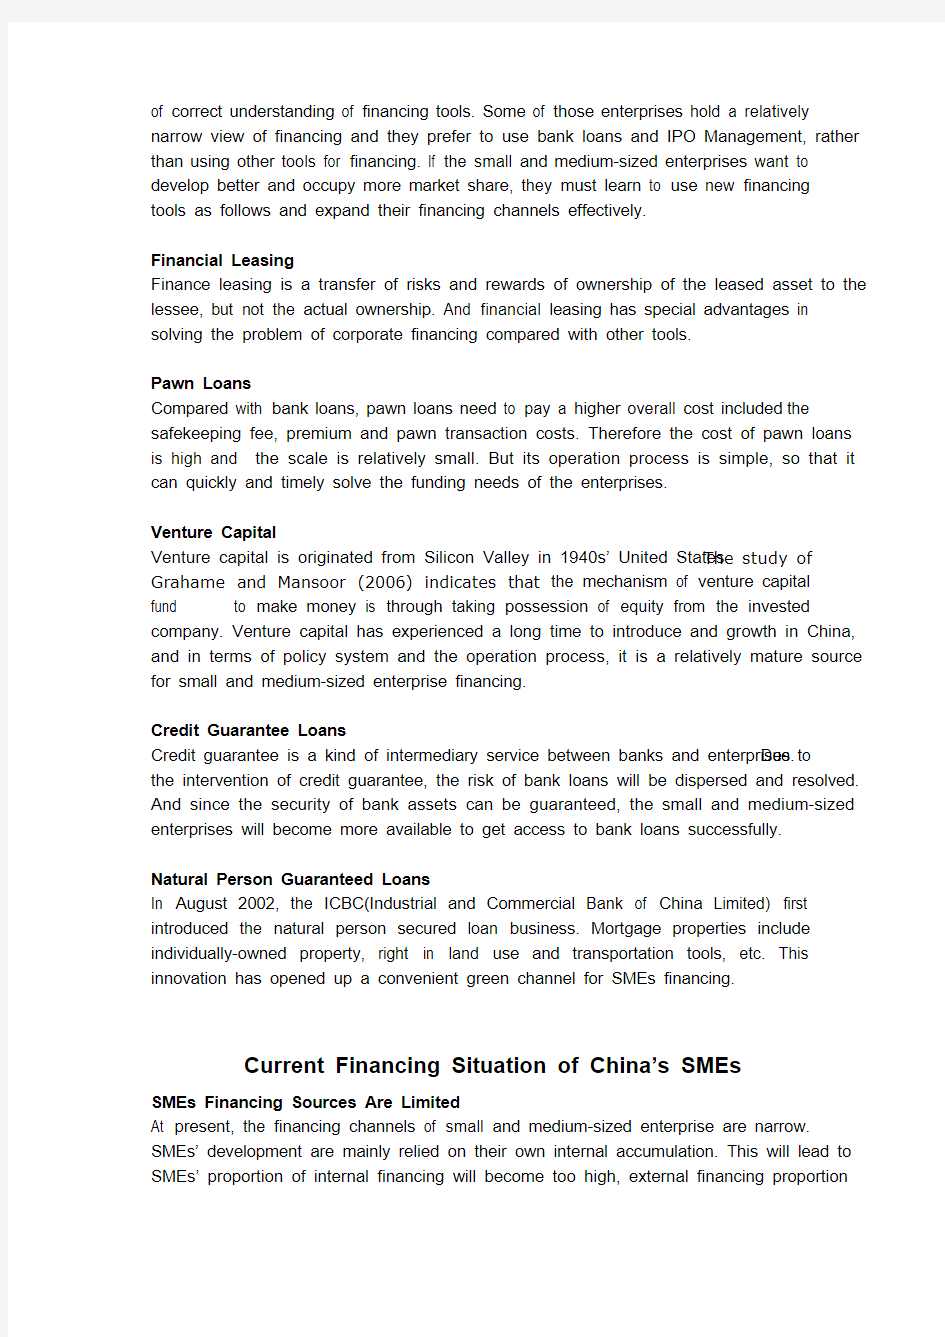 [VIP专享]Financing Difficulties of SMEs in China